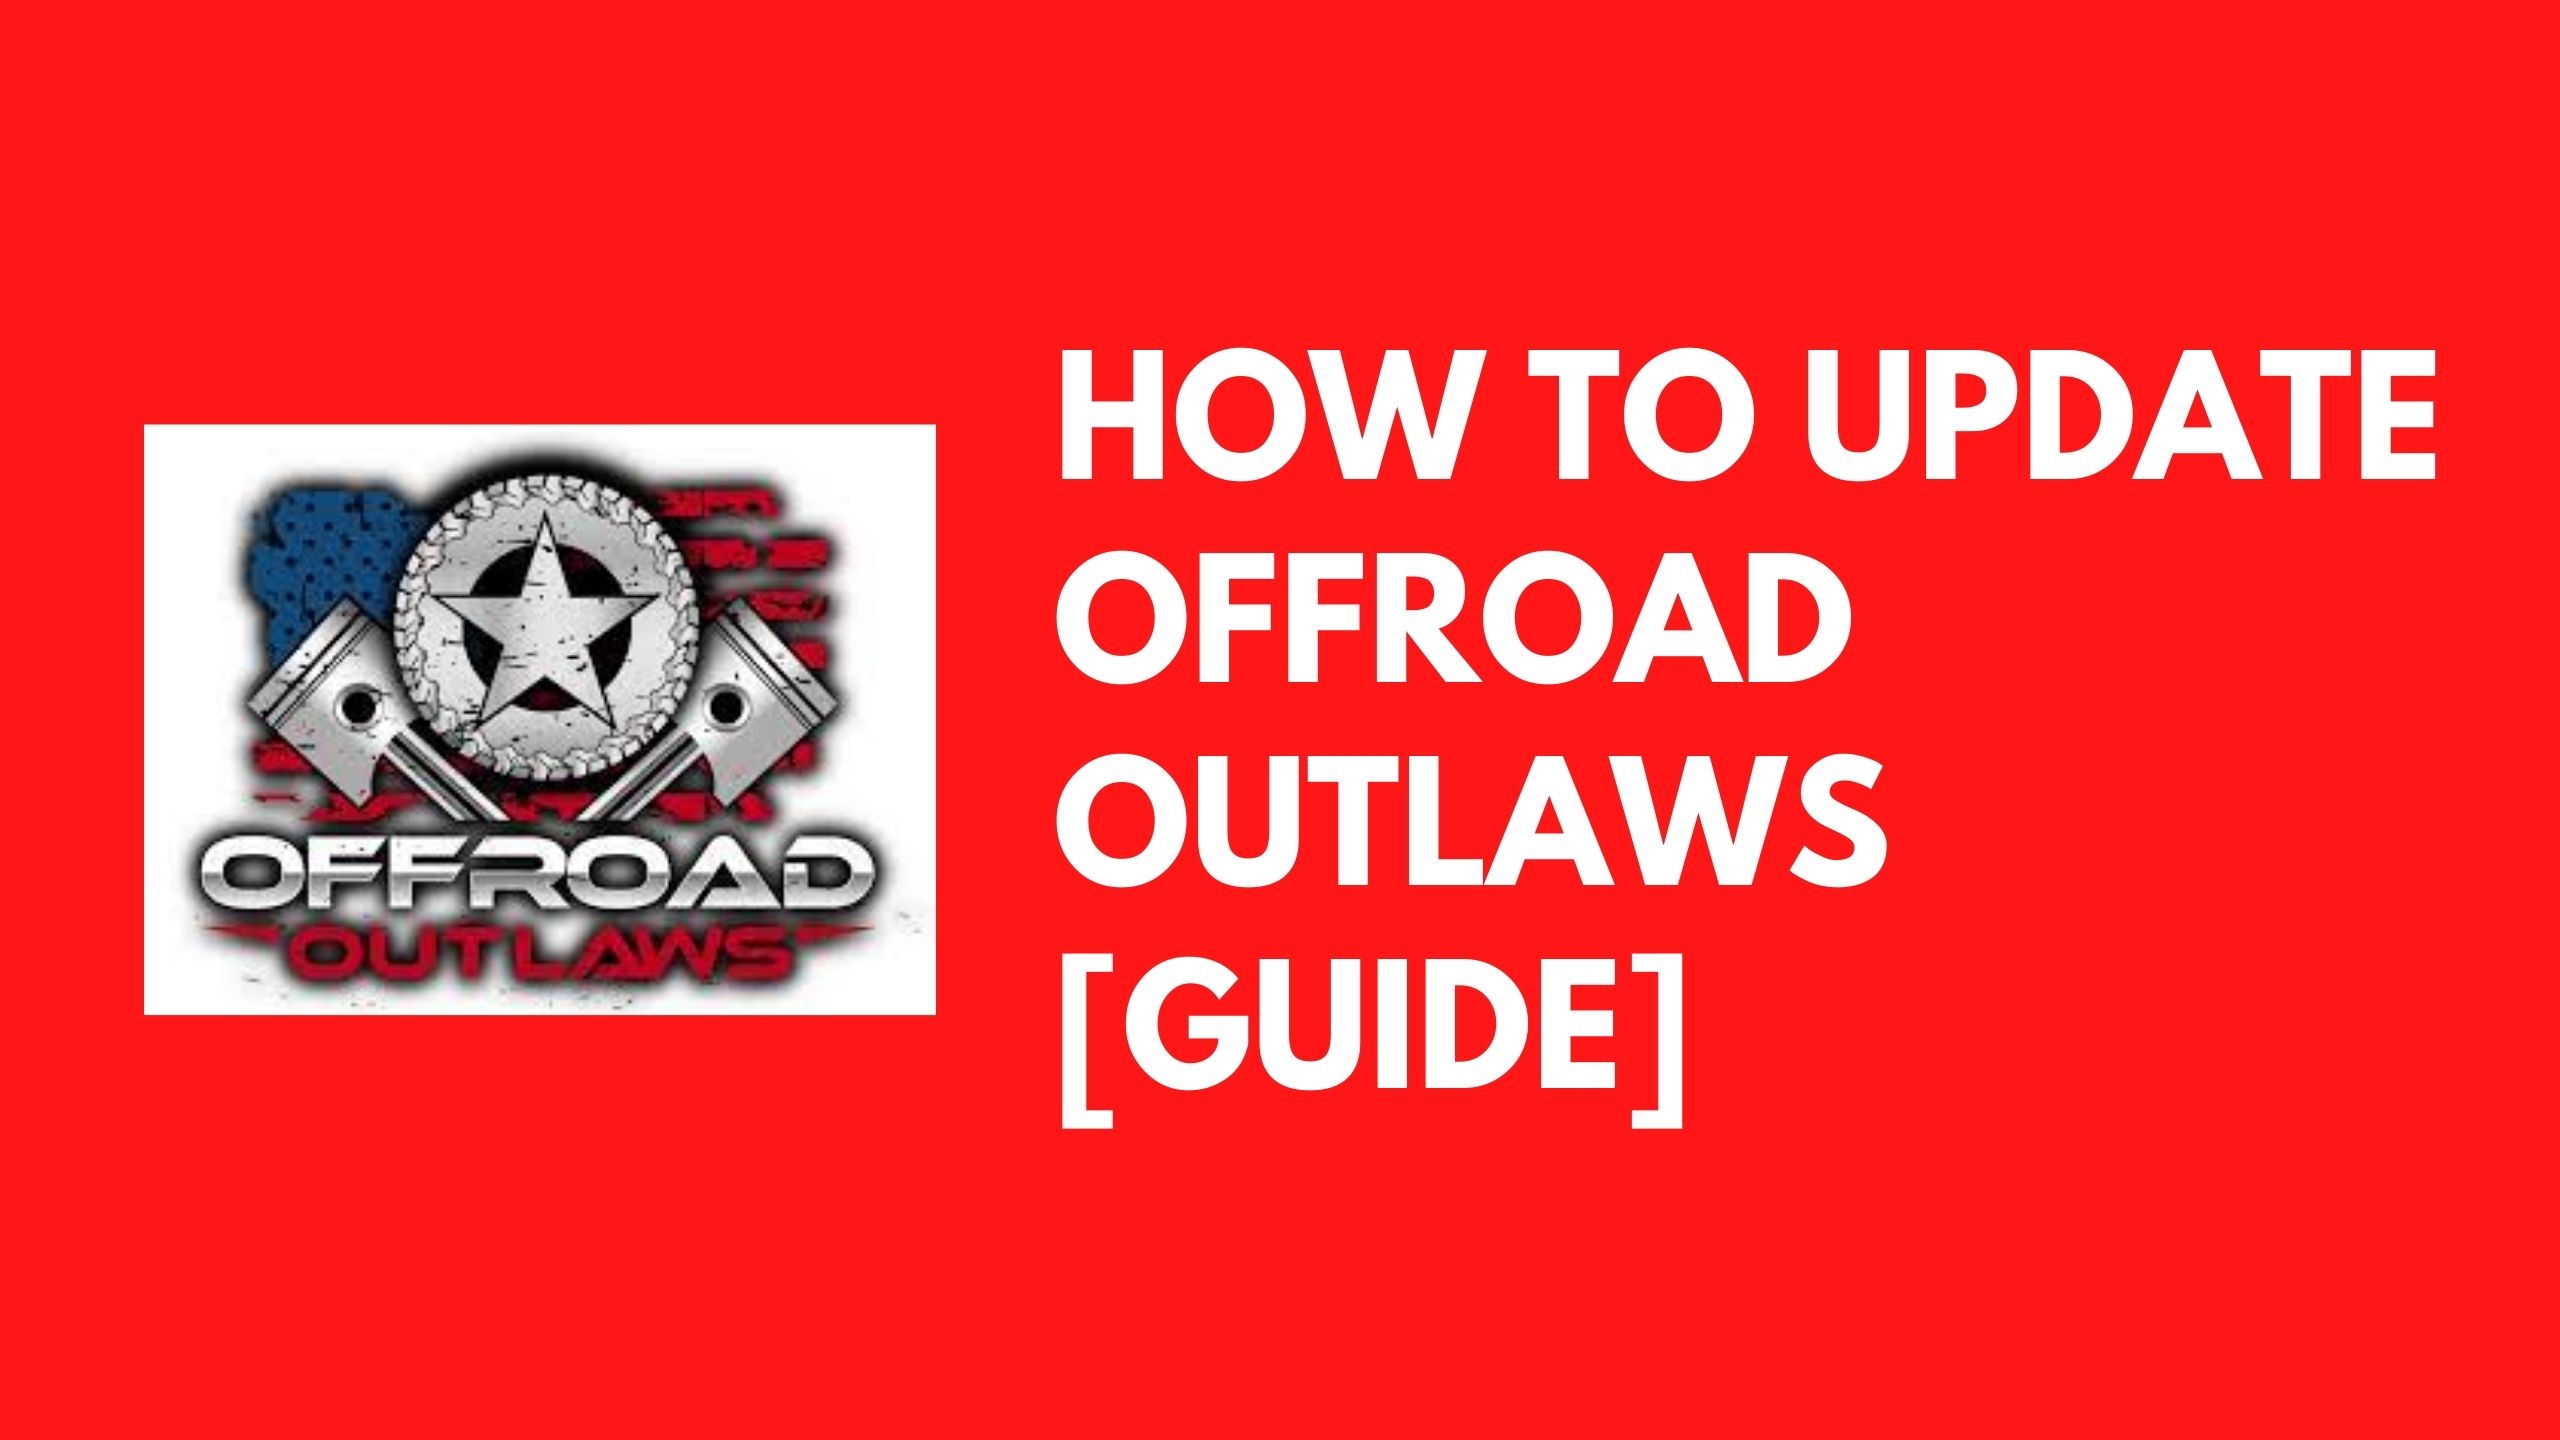 How to Update Offroad Outlaws